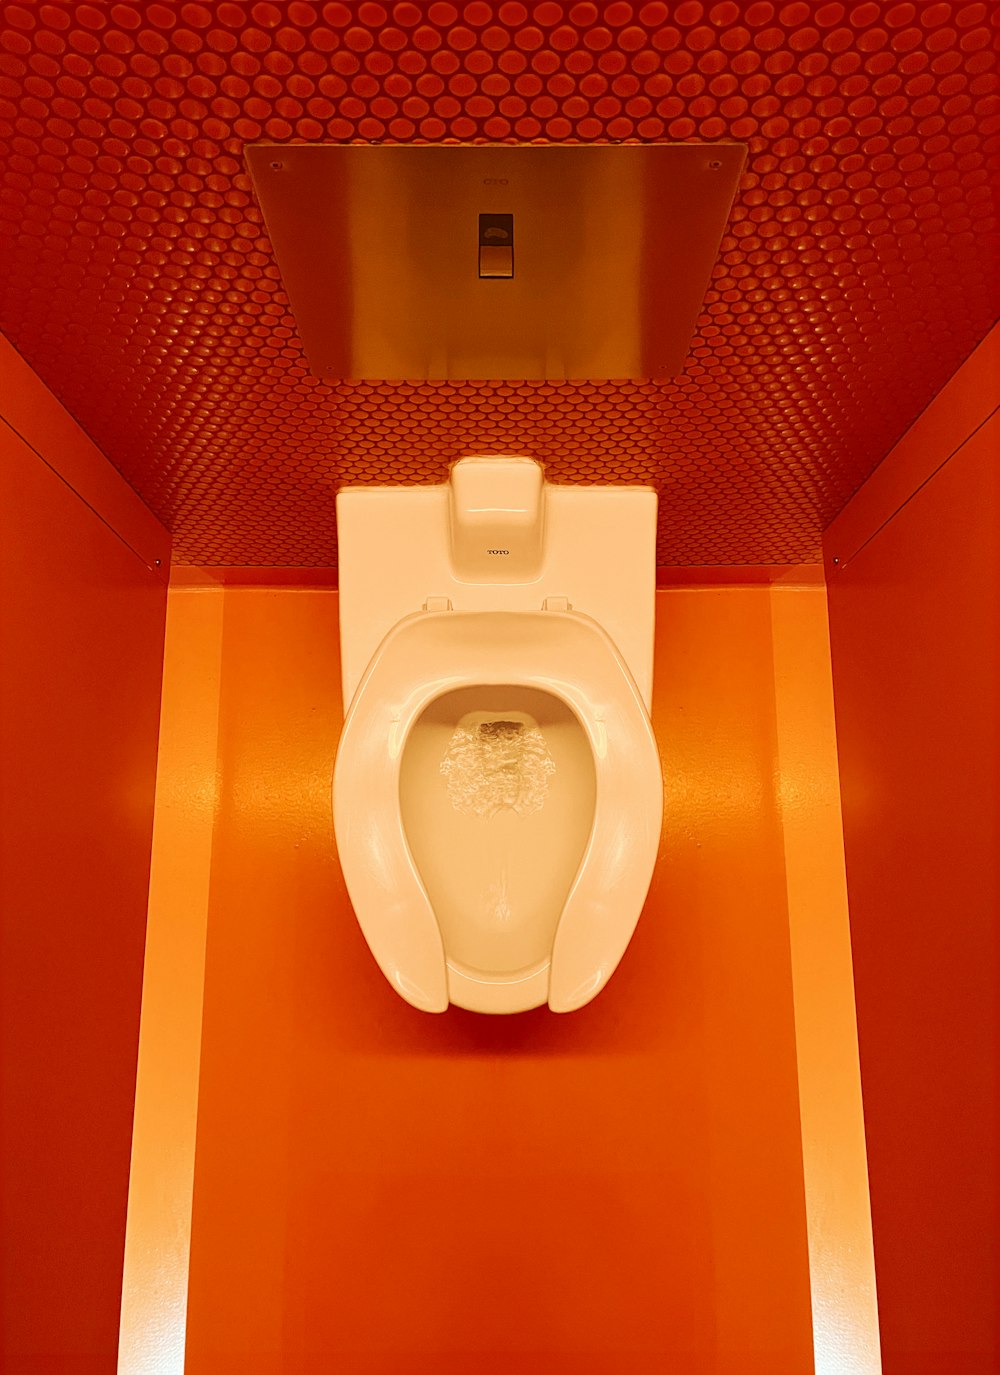 a white toilet sitting in a bathroom next to a red wall